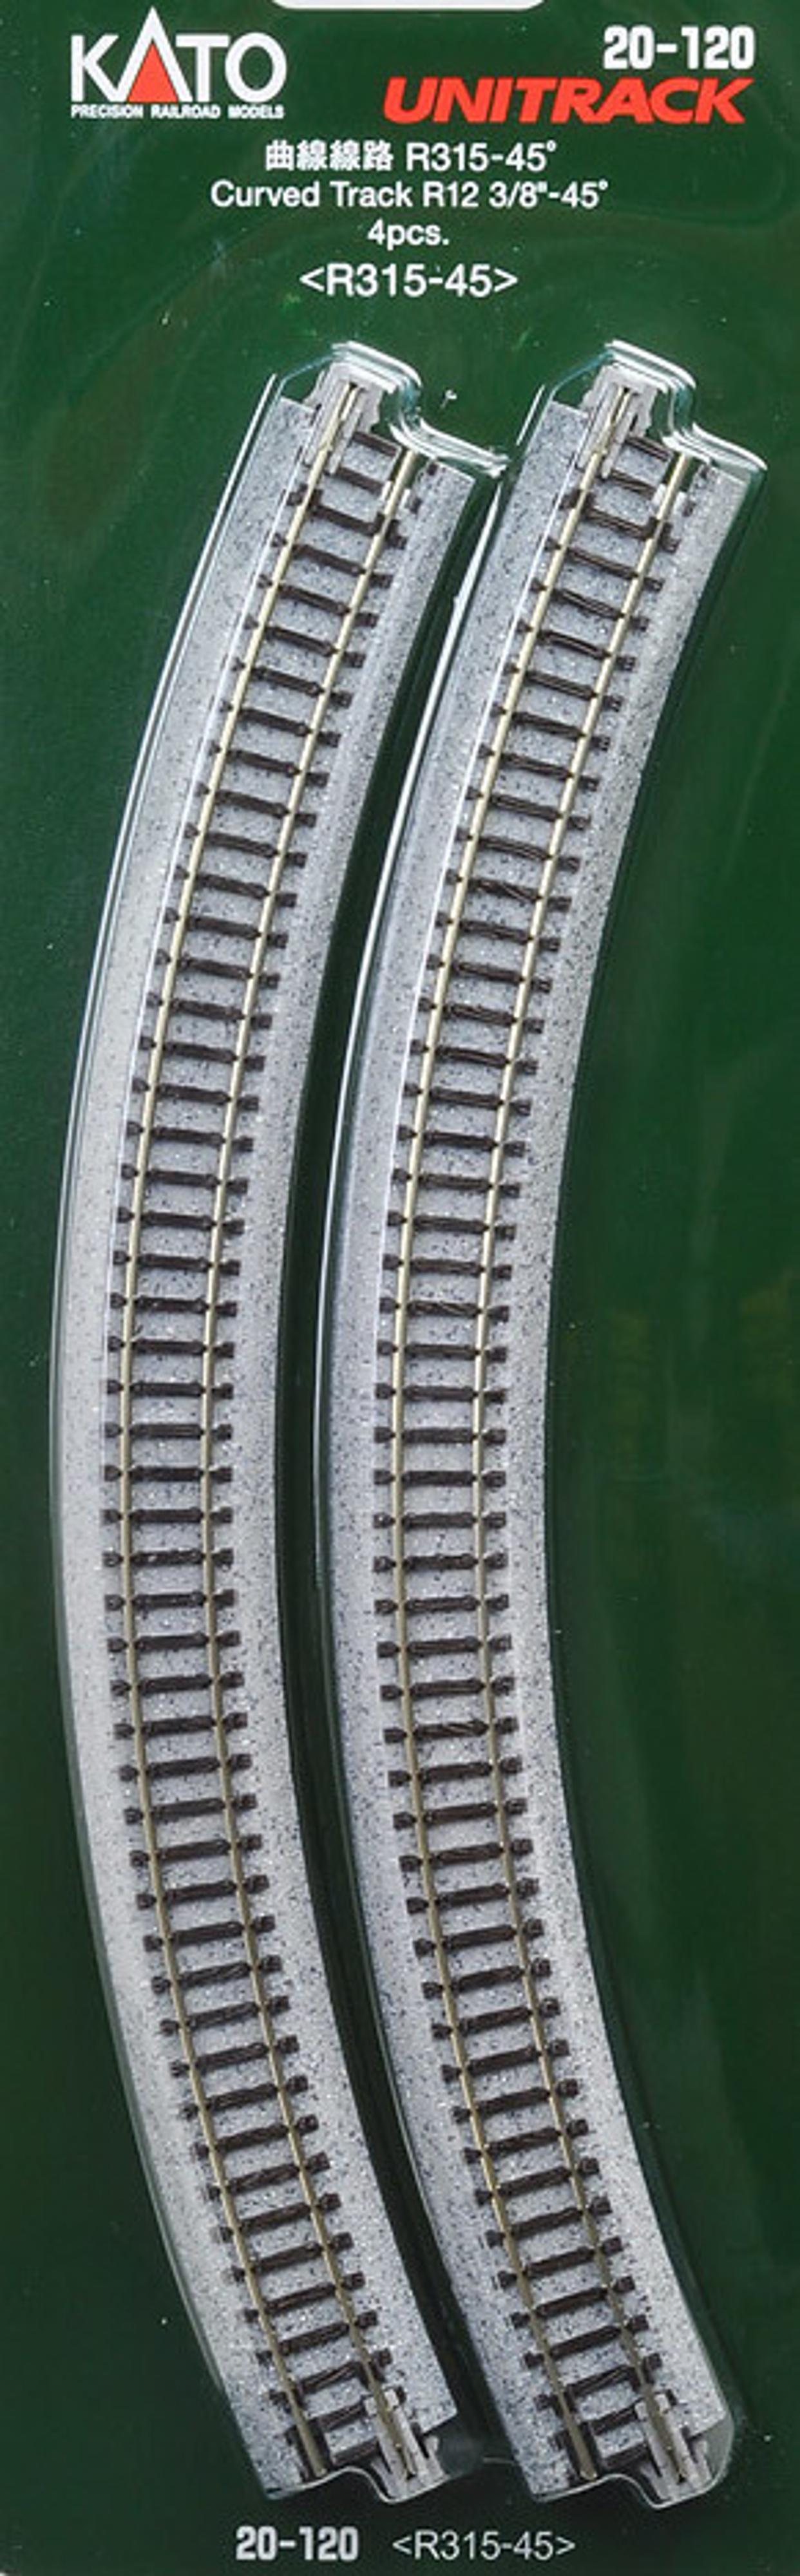 Kato N Scale Unitrack Curved Track 12 3/8in 45D (4 pcs)